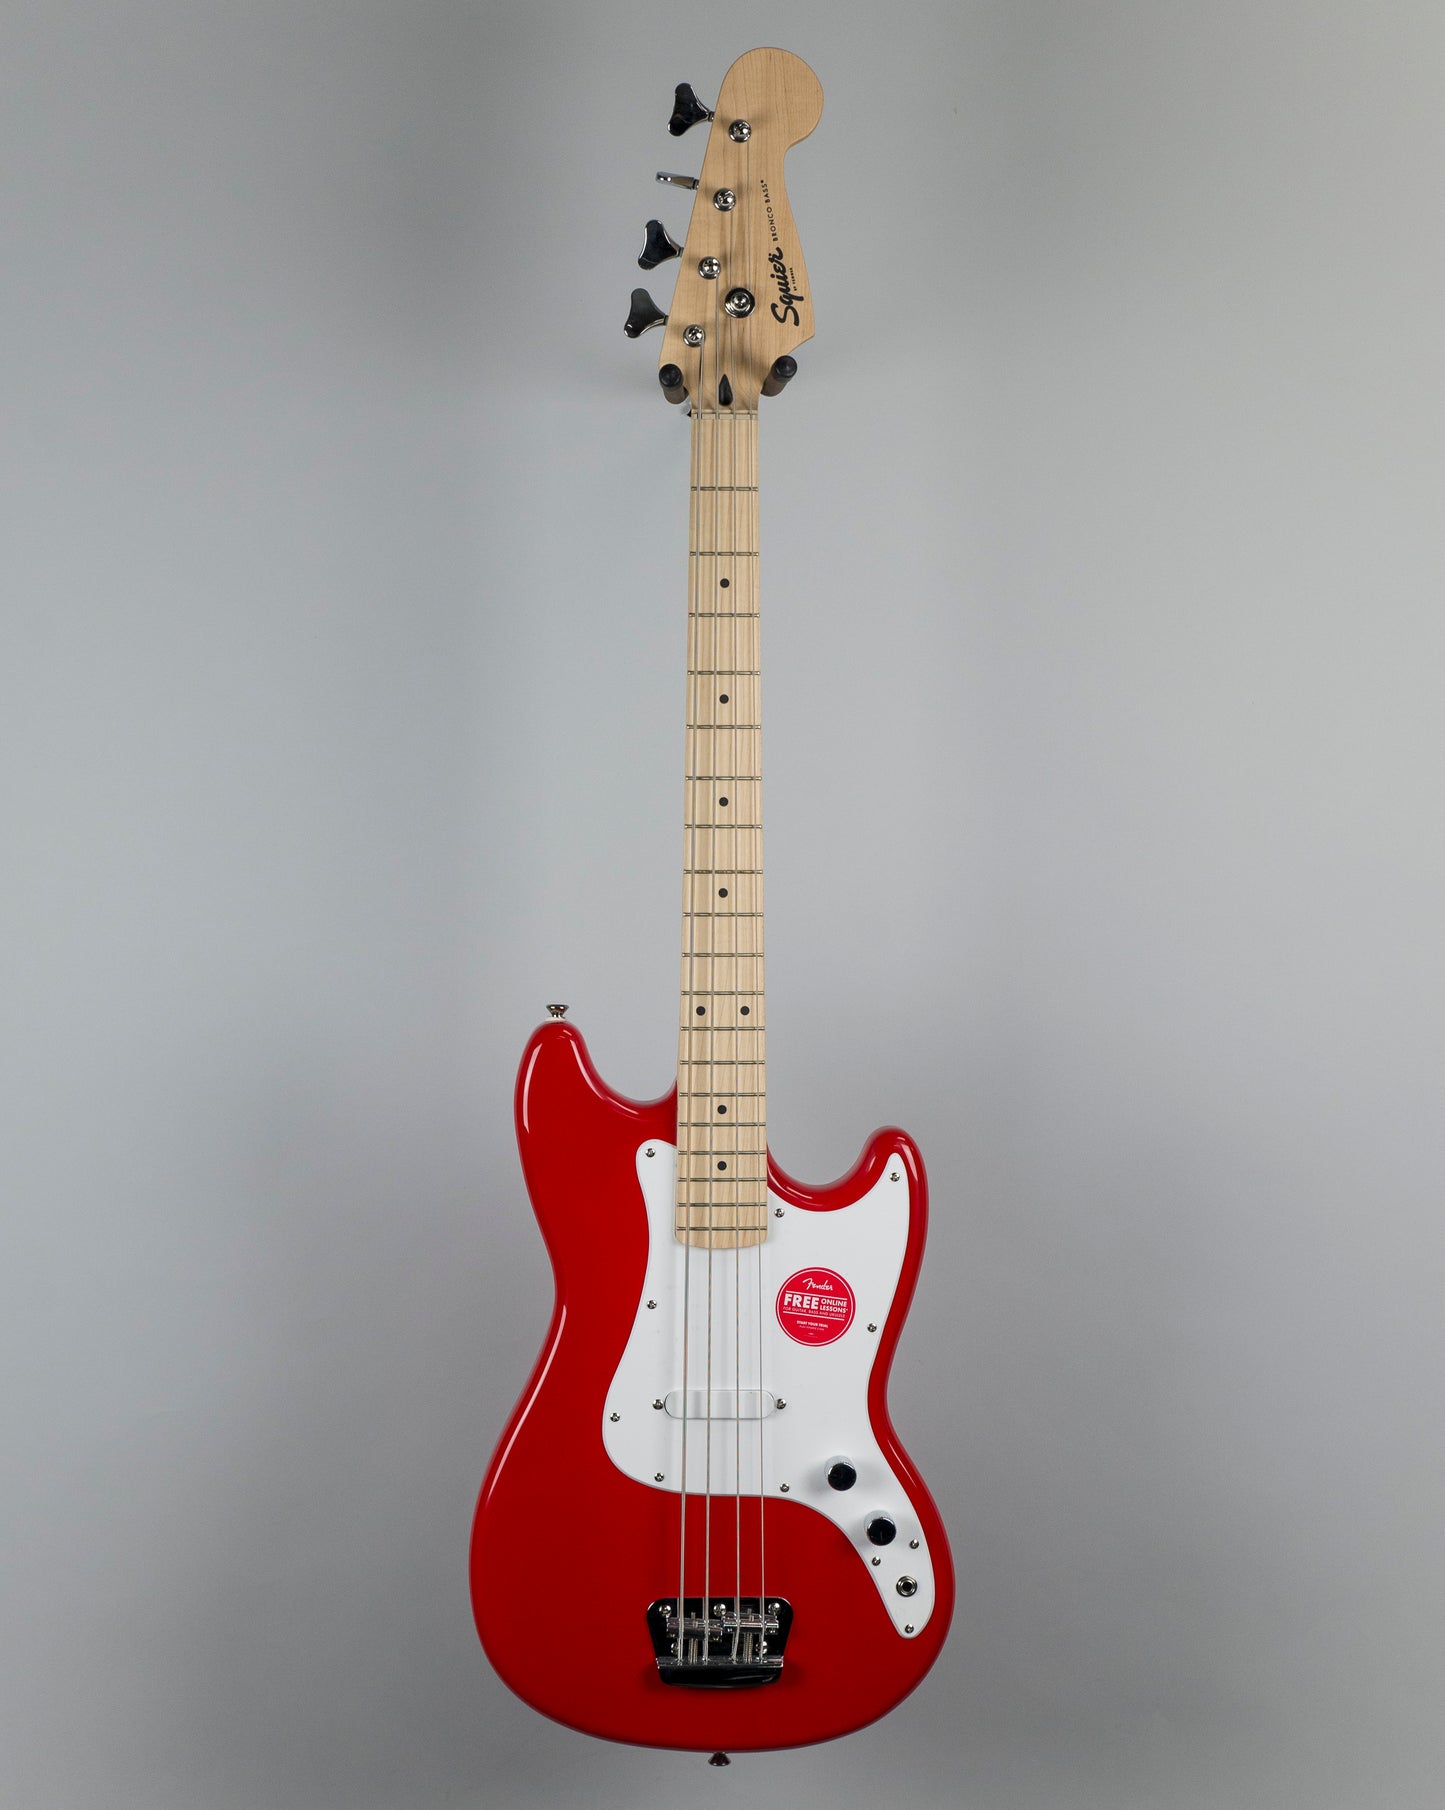 Squier Affinity Series Bronco Bass Guitar in Torino Red